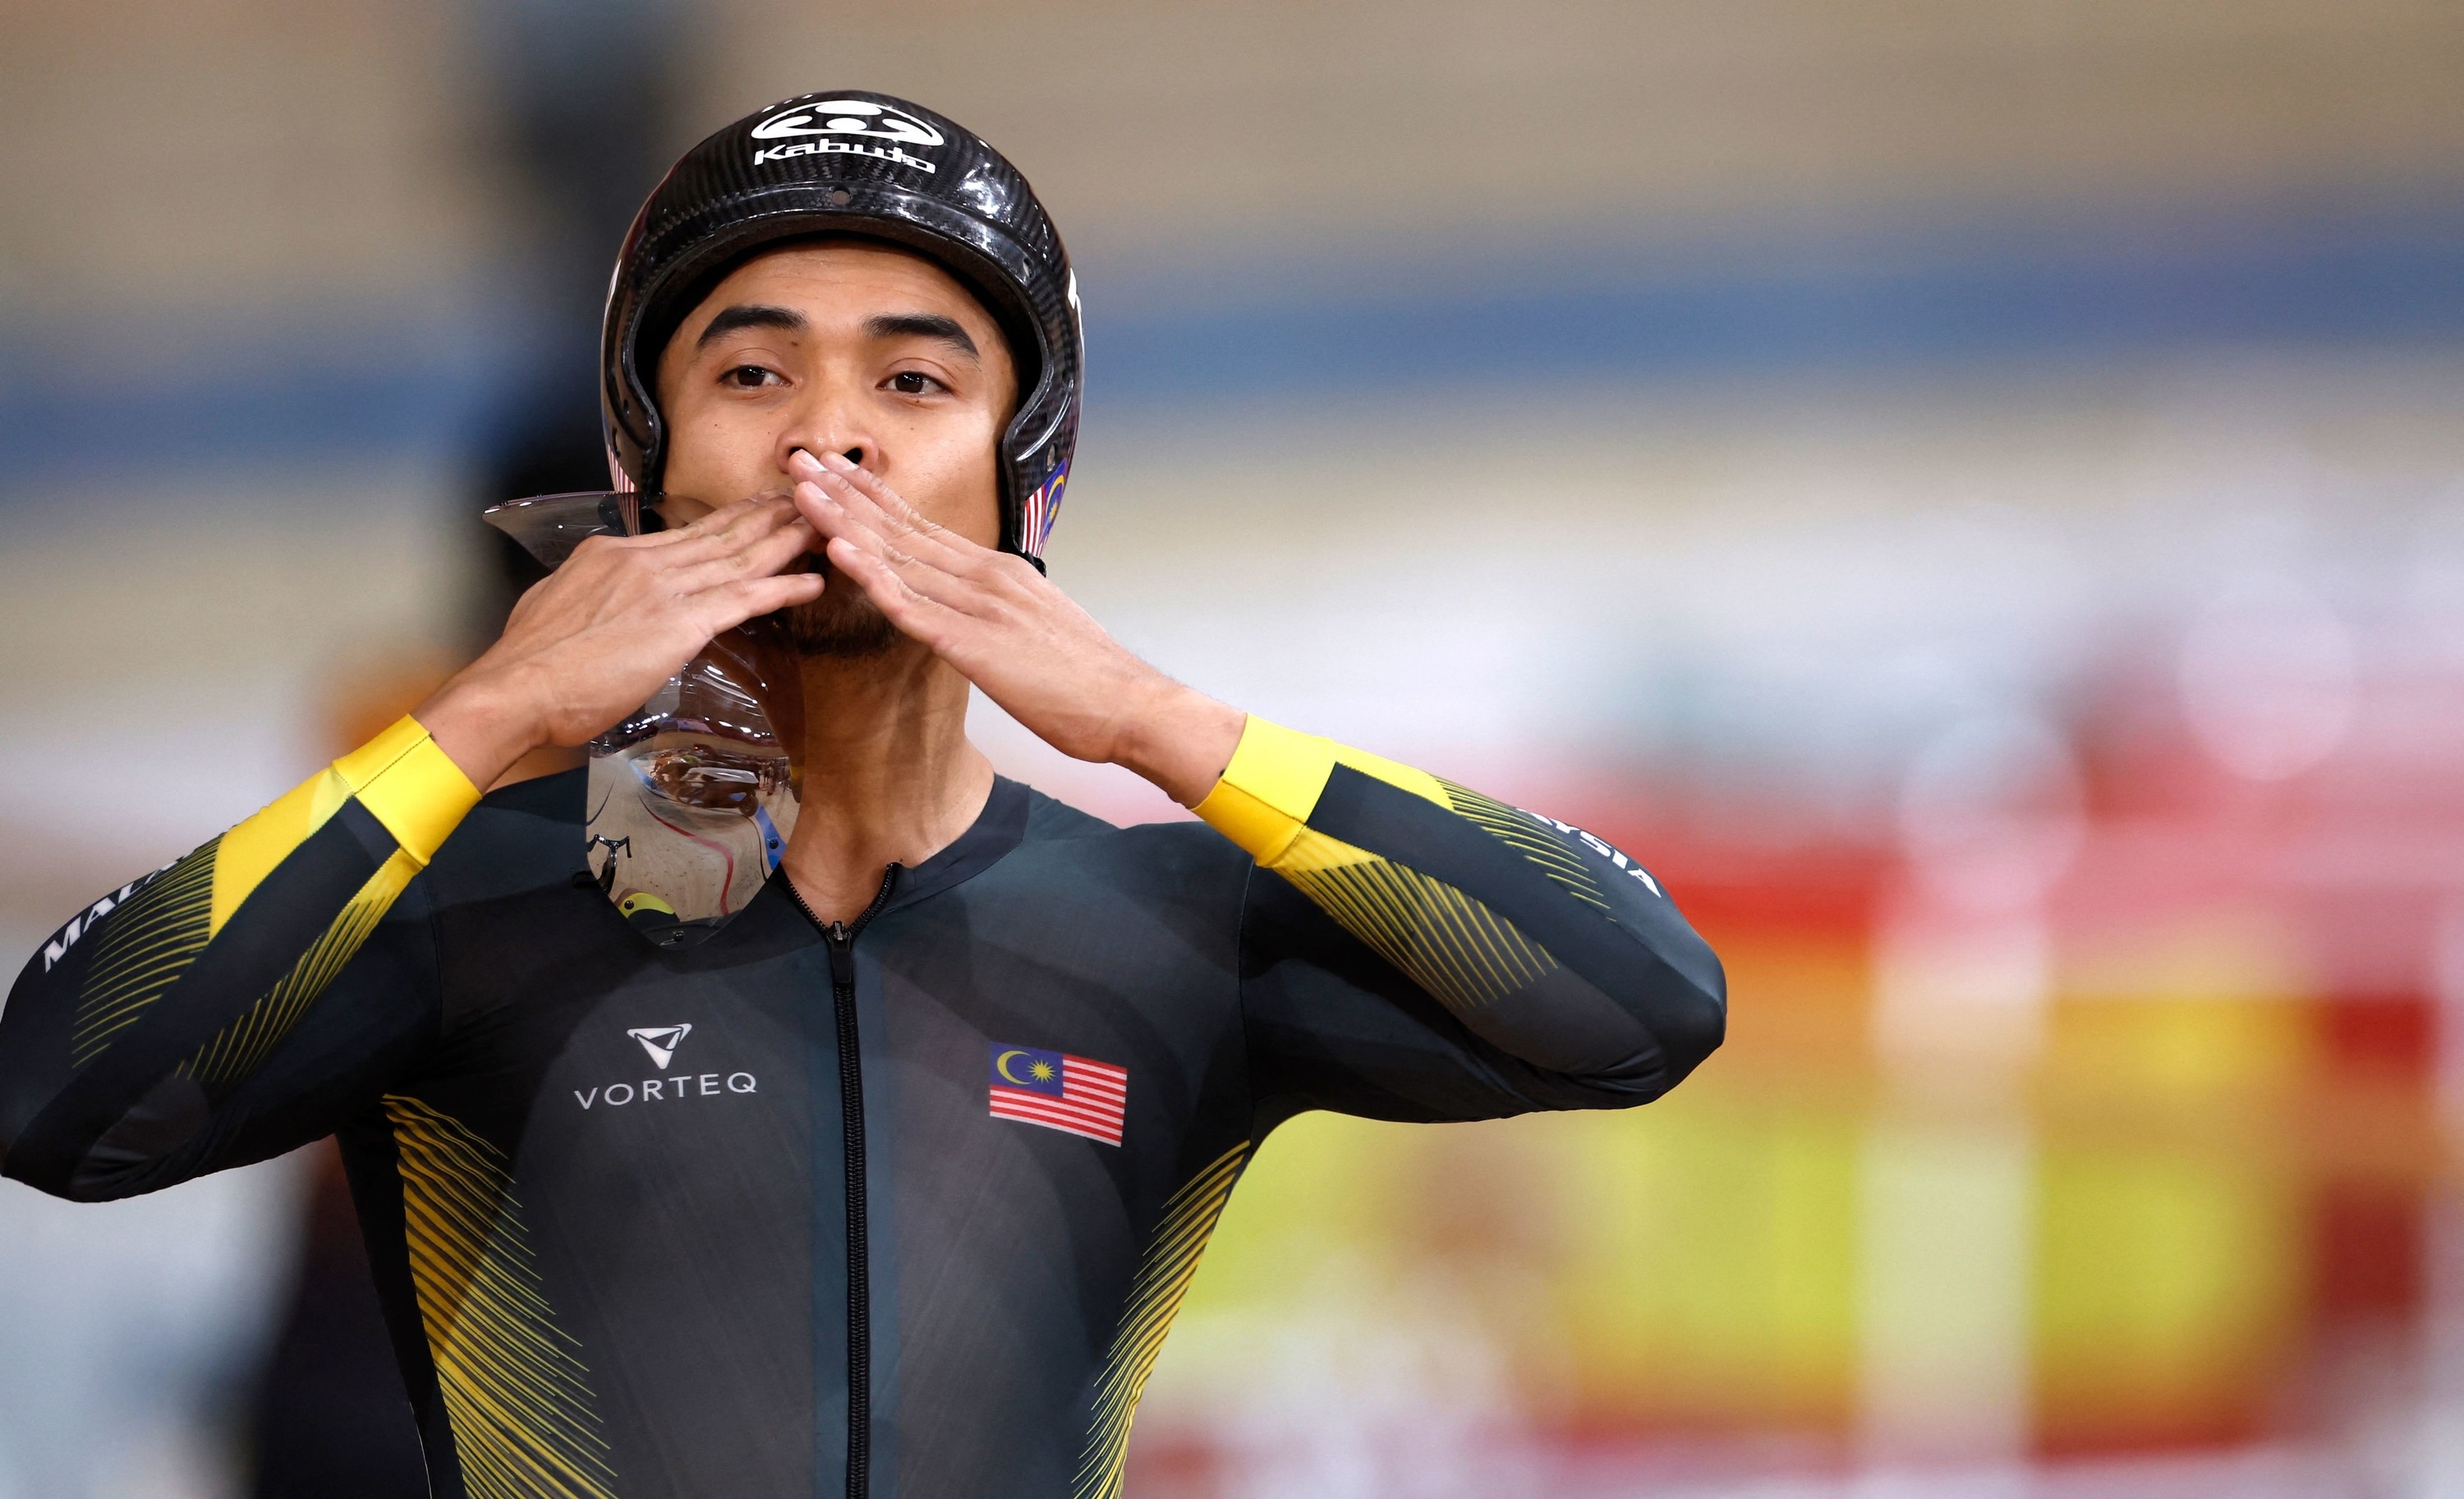 An Malaysian athlete blowing a kiss to the crowd